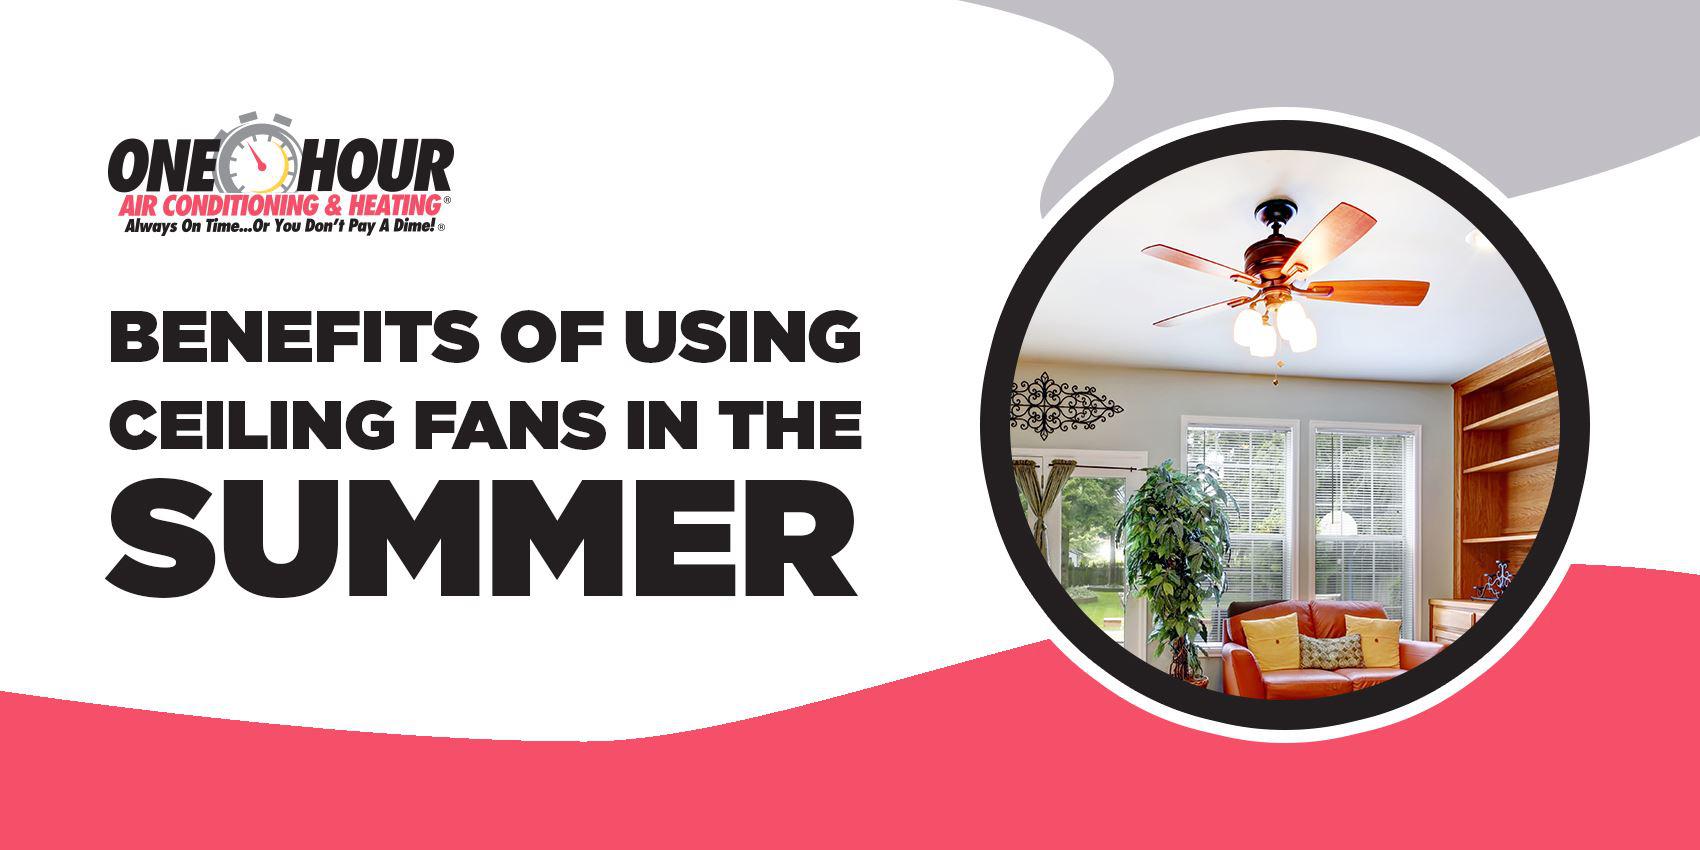 Benefits of Using Ceiling Fans in the Summer